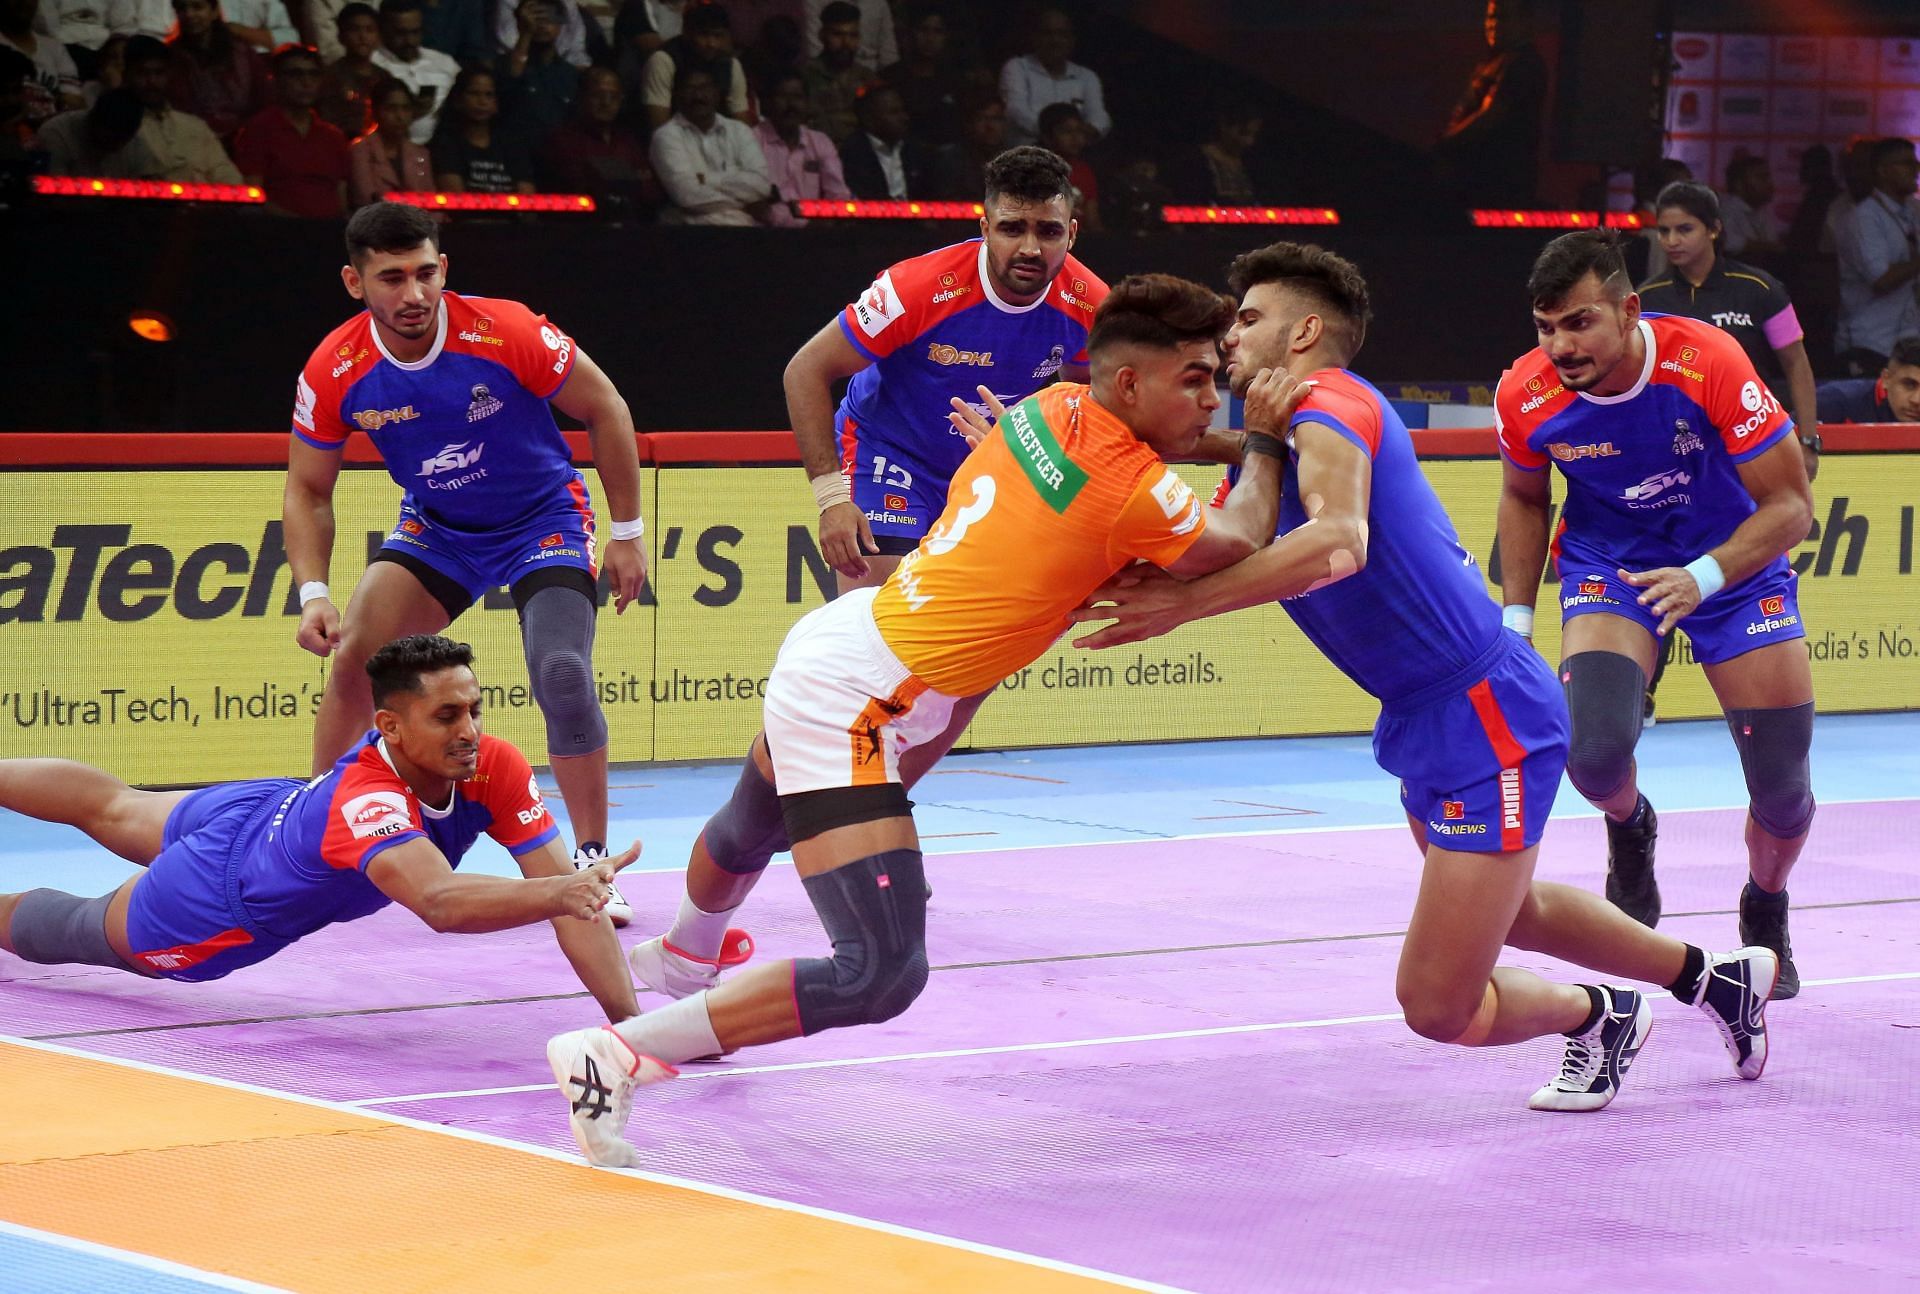 Will the Haryana Steelers build on their Head-to-head lead against Gujarat? (Credit: PKL)